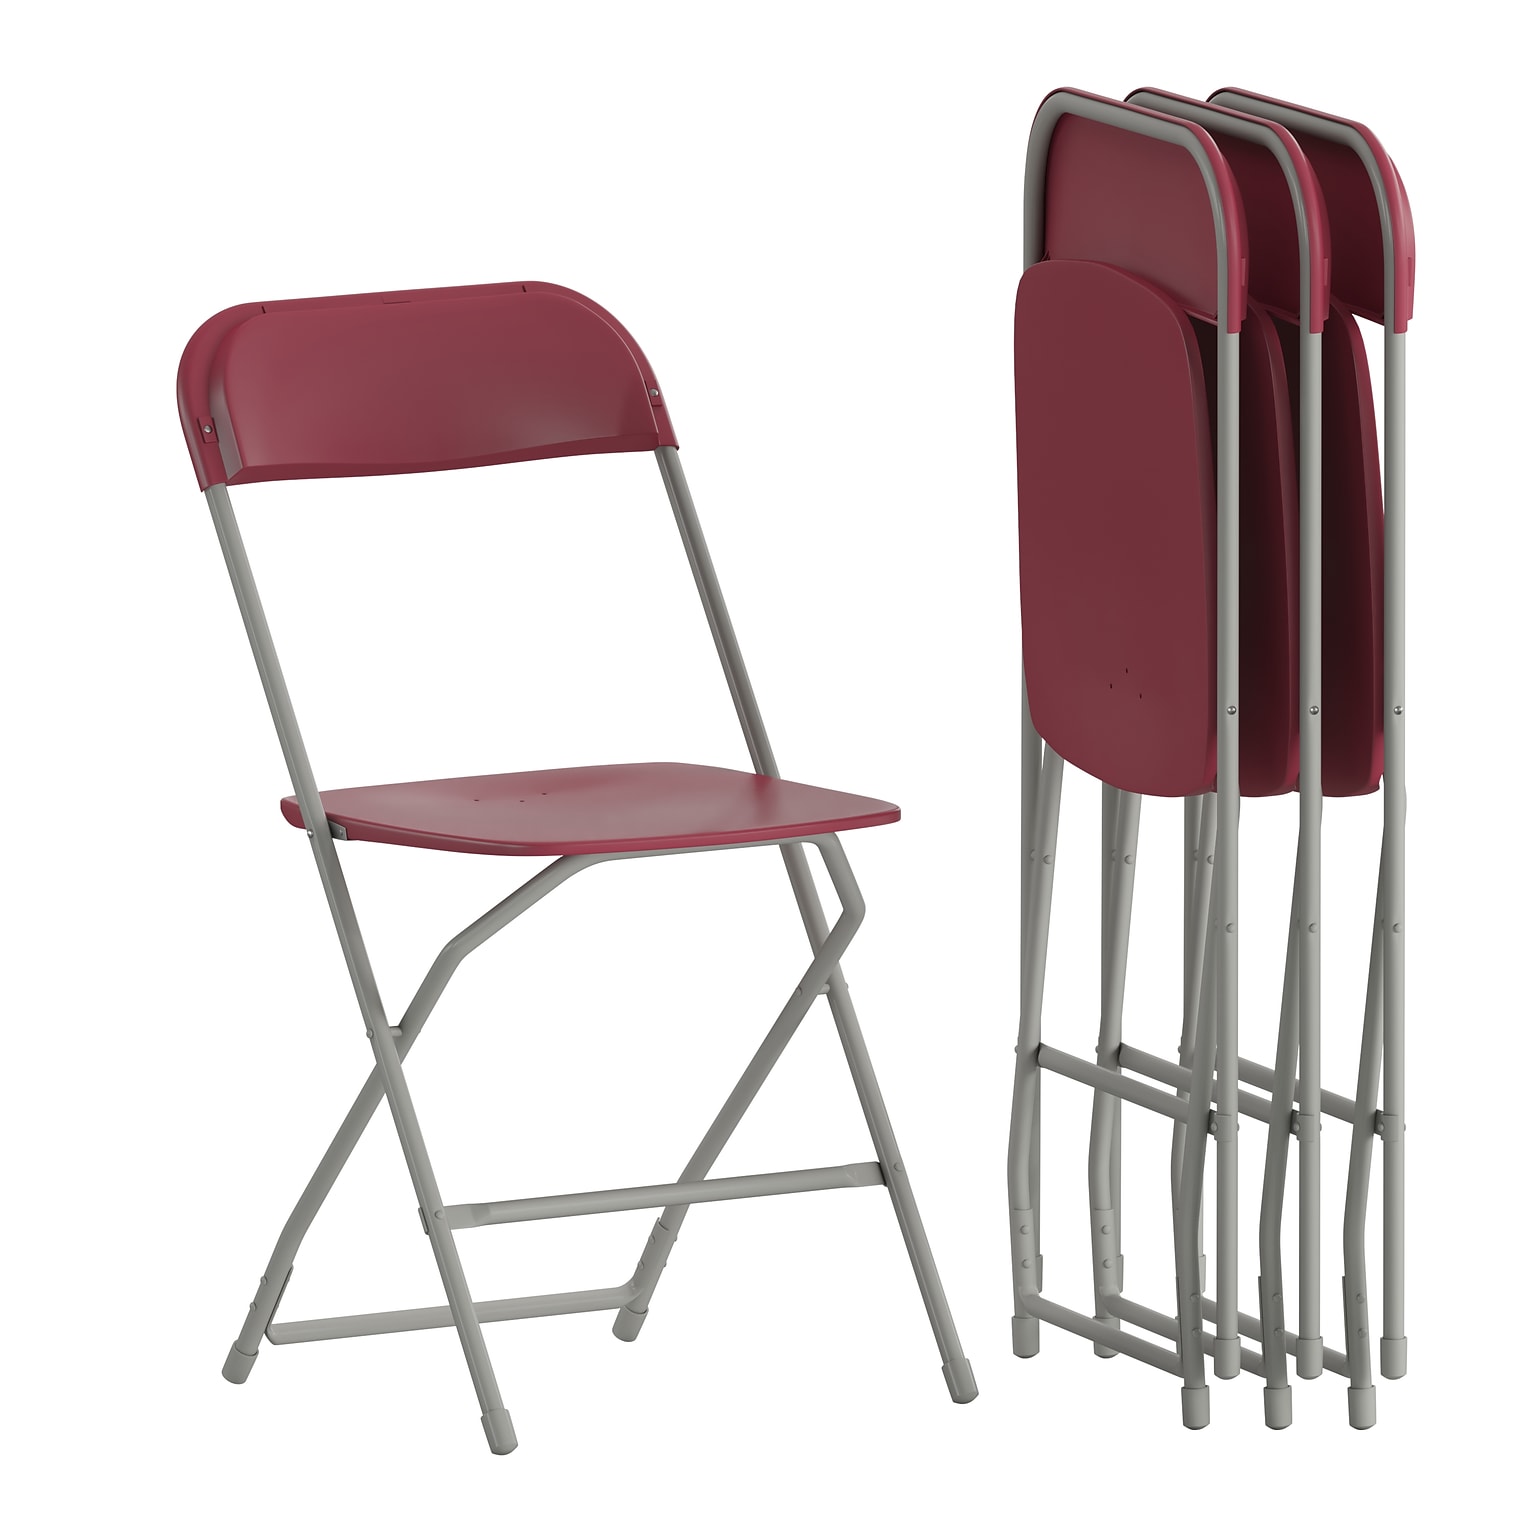 Flash Furniture Plastic Folding Chair, Red, Set of 4 (4LEL3RED)